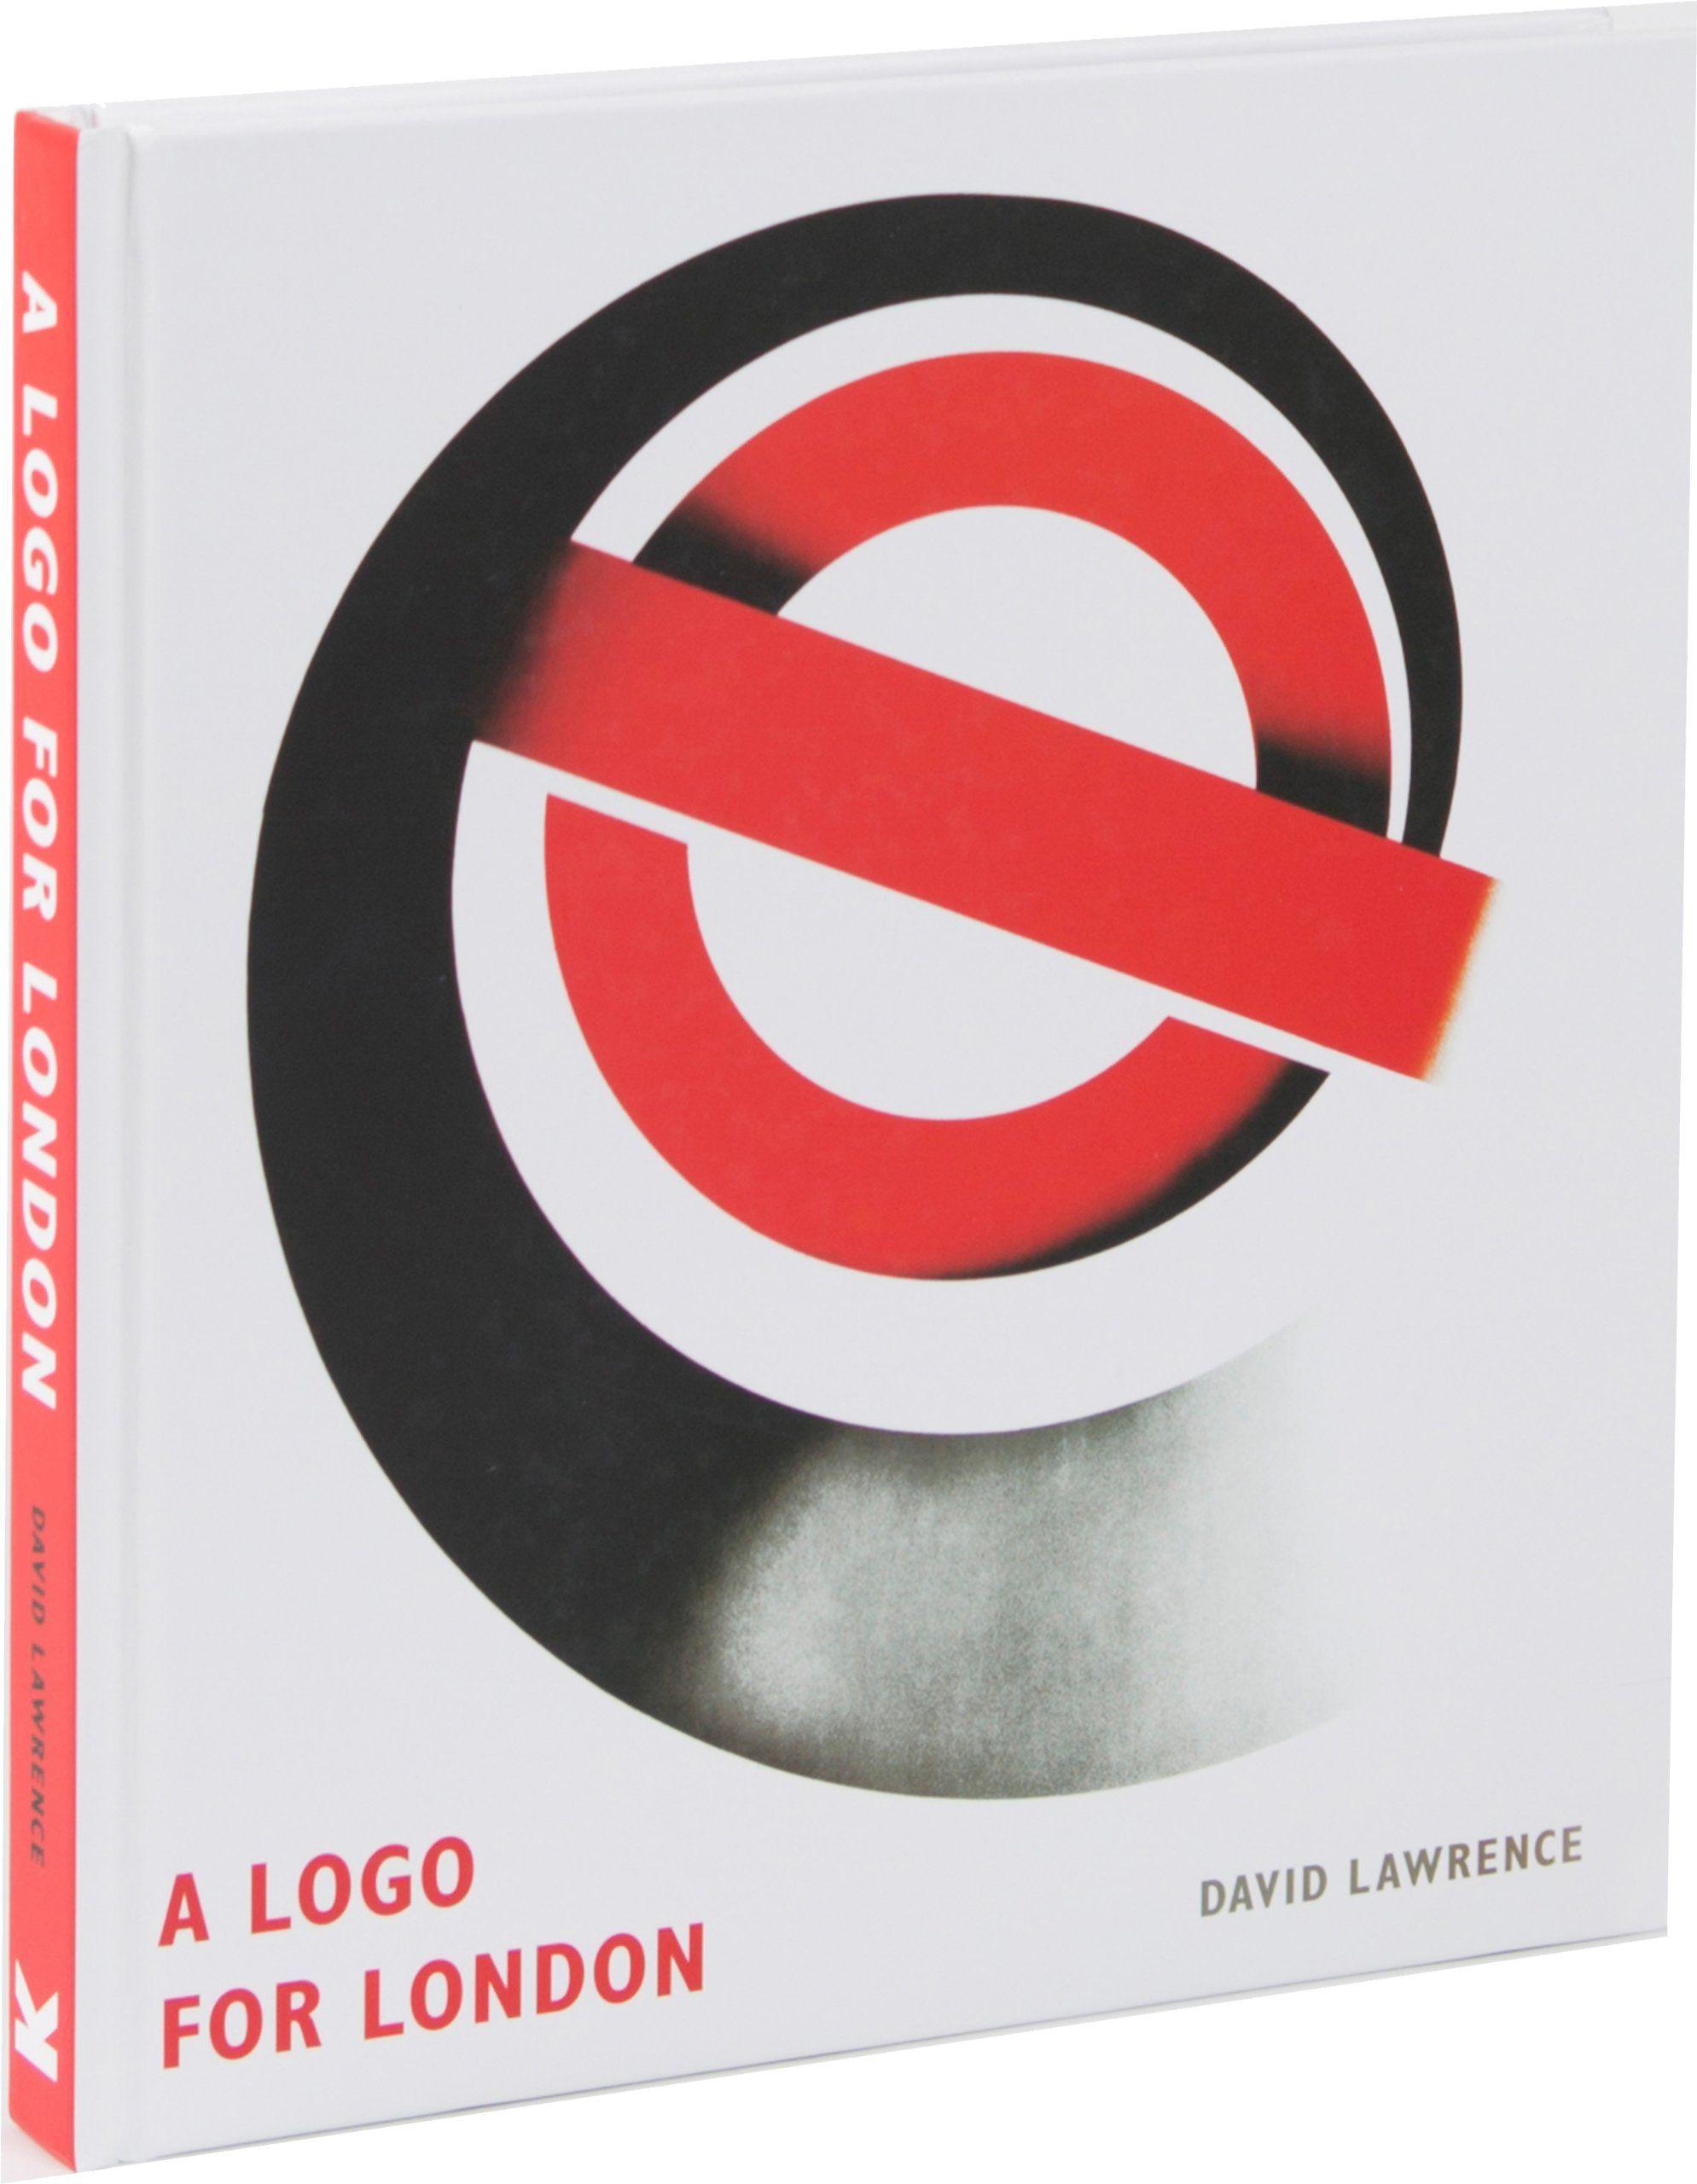 Looks Like in a Red Circle Logo - Logo for London: Amazon.co.uk: David Lawrence: Books